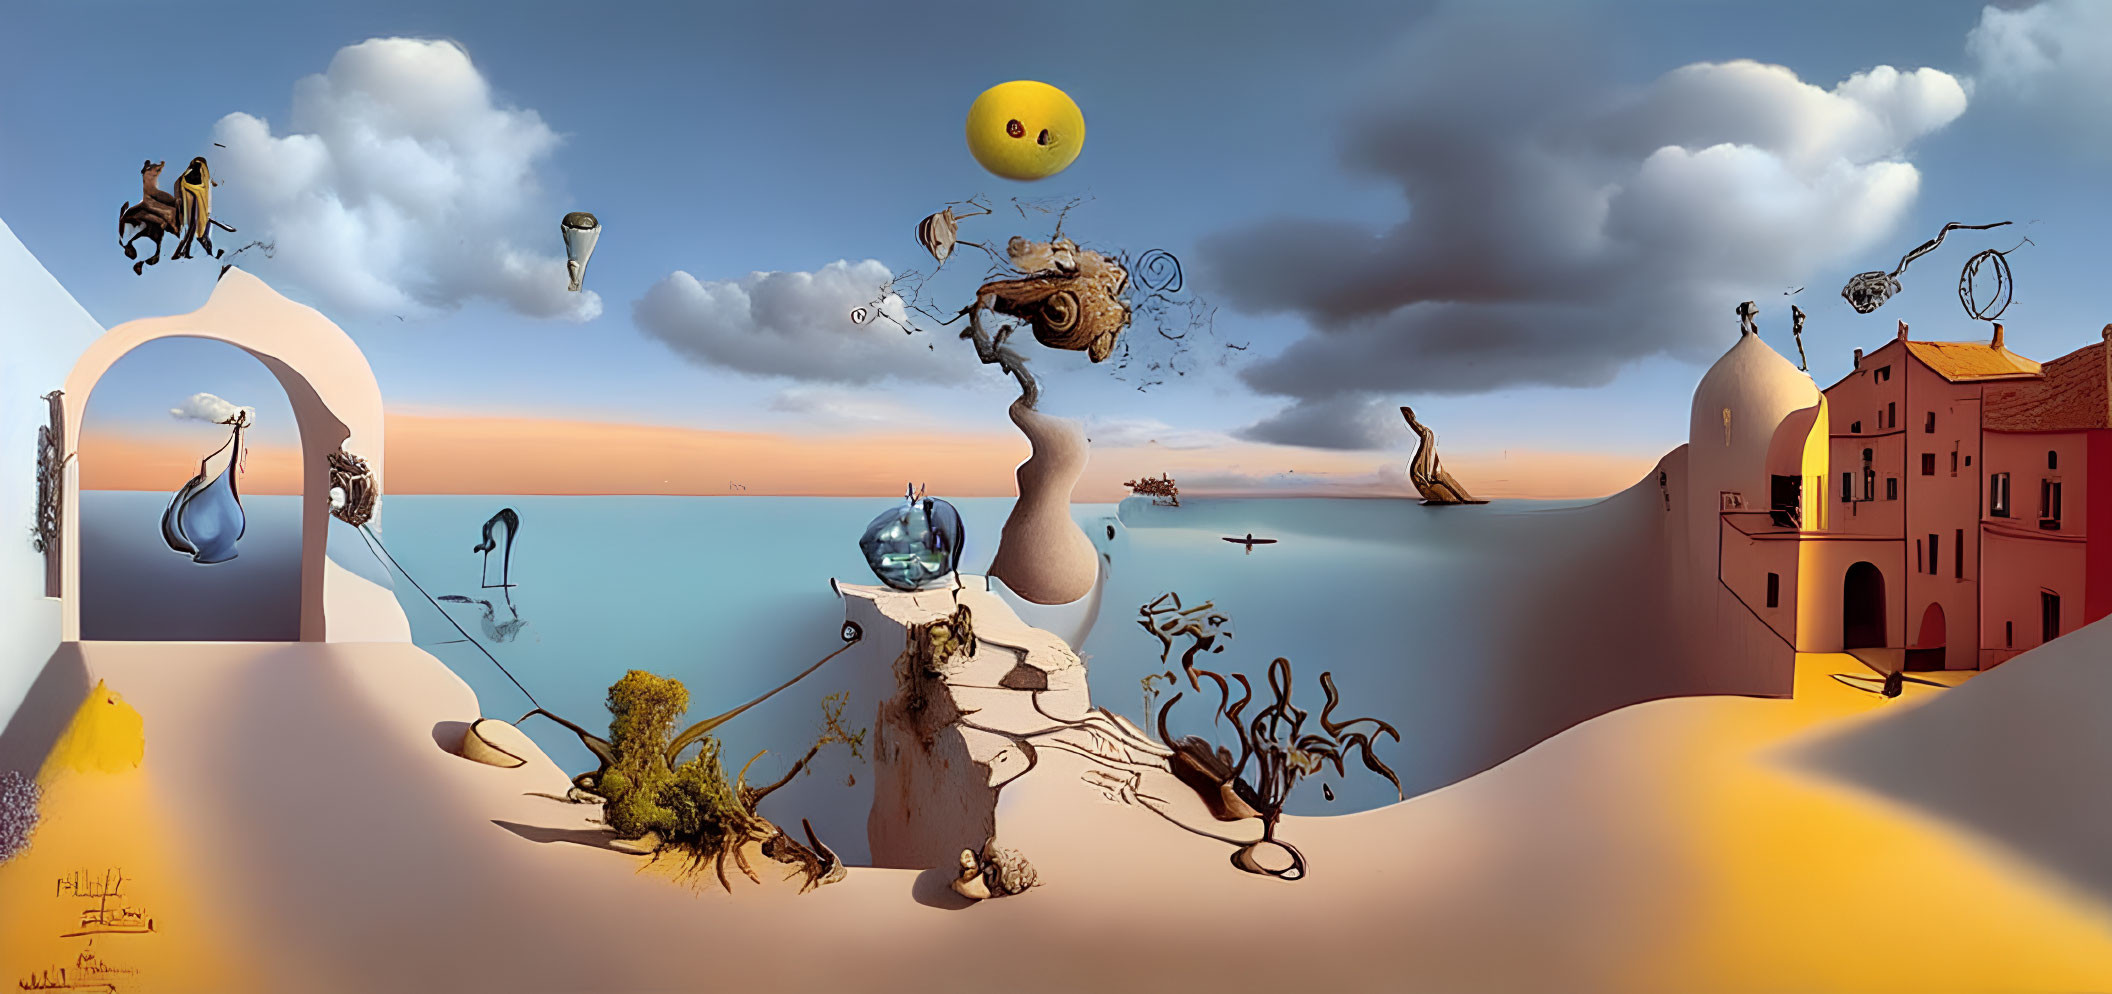 Panoramic surreal landscape with floating objects and whimsical shapes